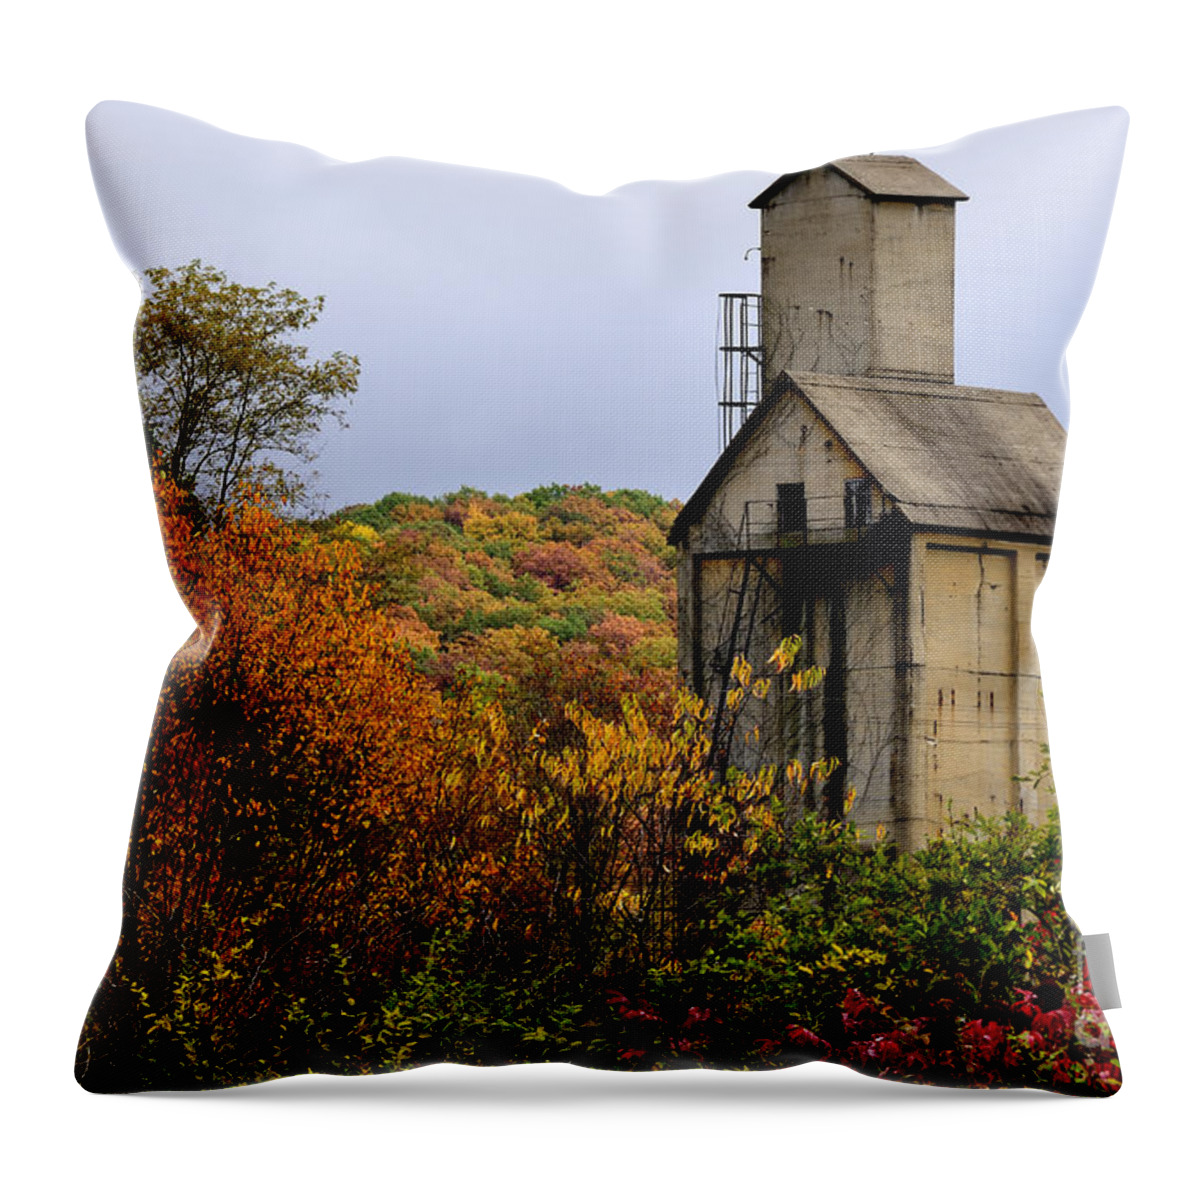 Sand House Throw Pillow featuring the photograph Sand House Abandoned Train Yard by Thomas R Fletcher